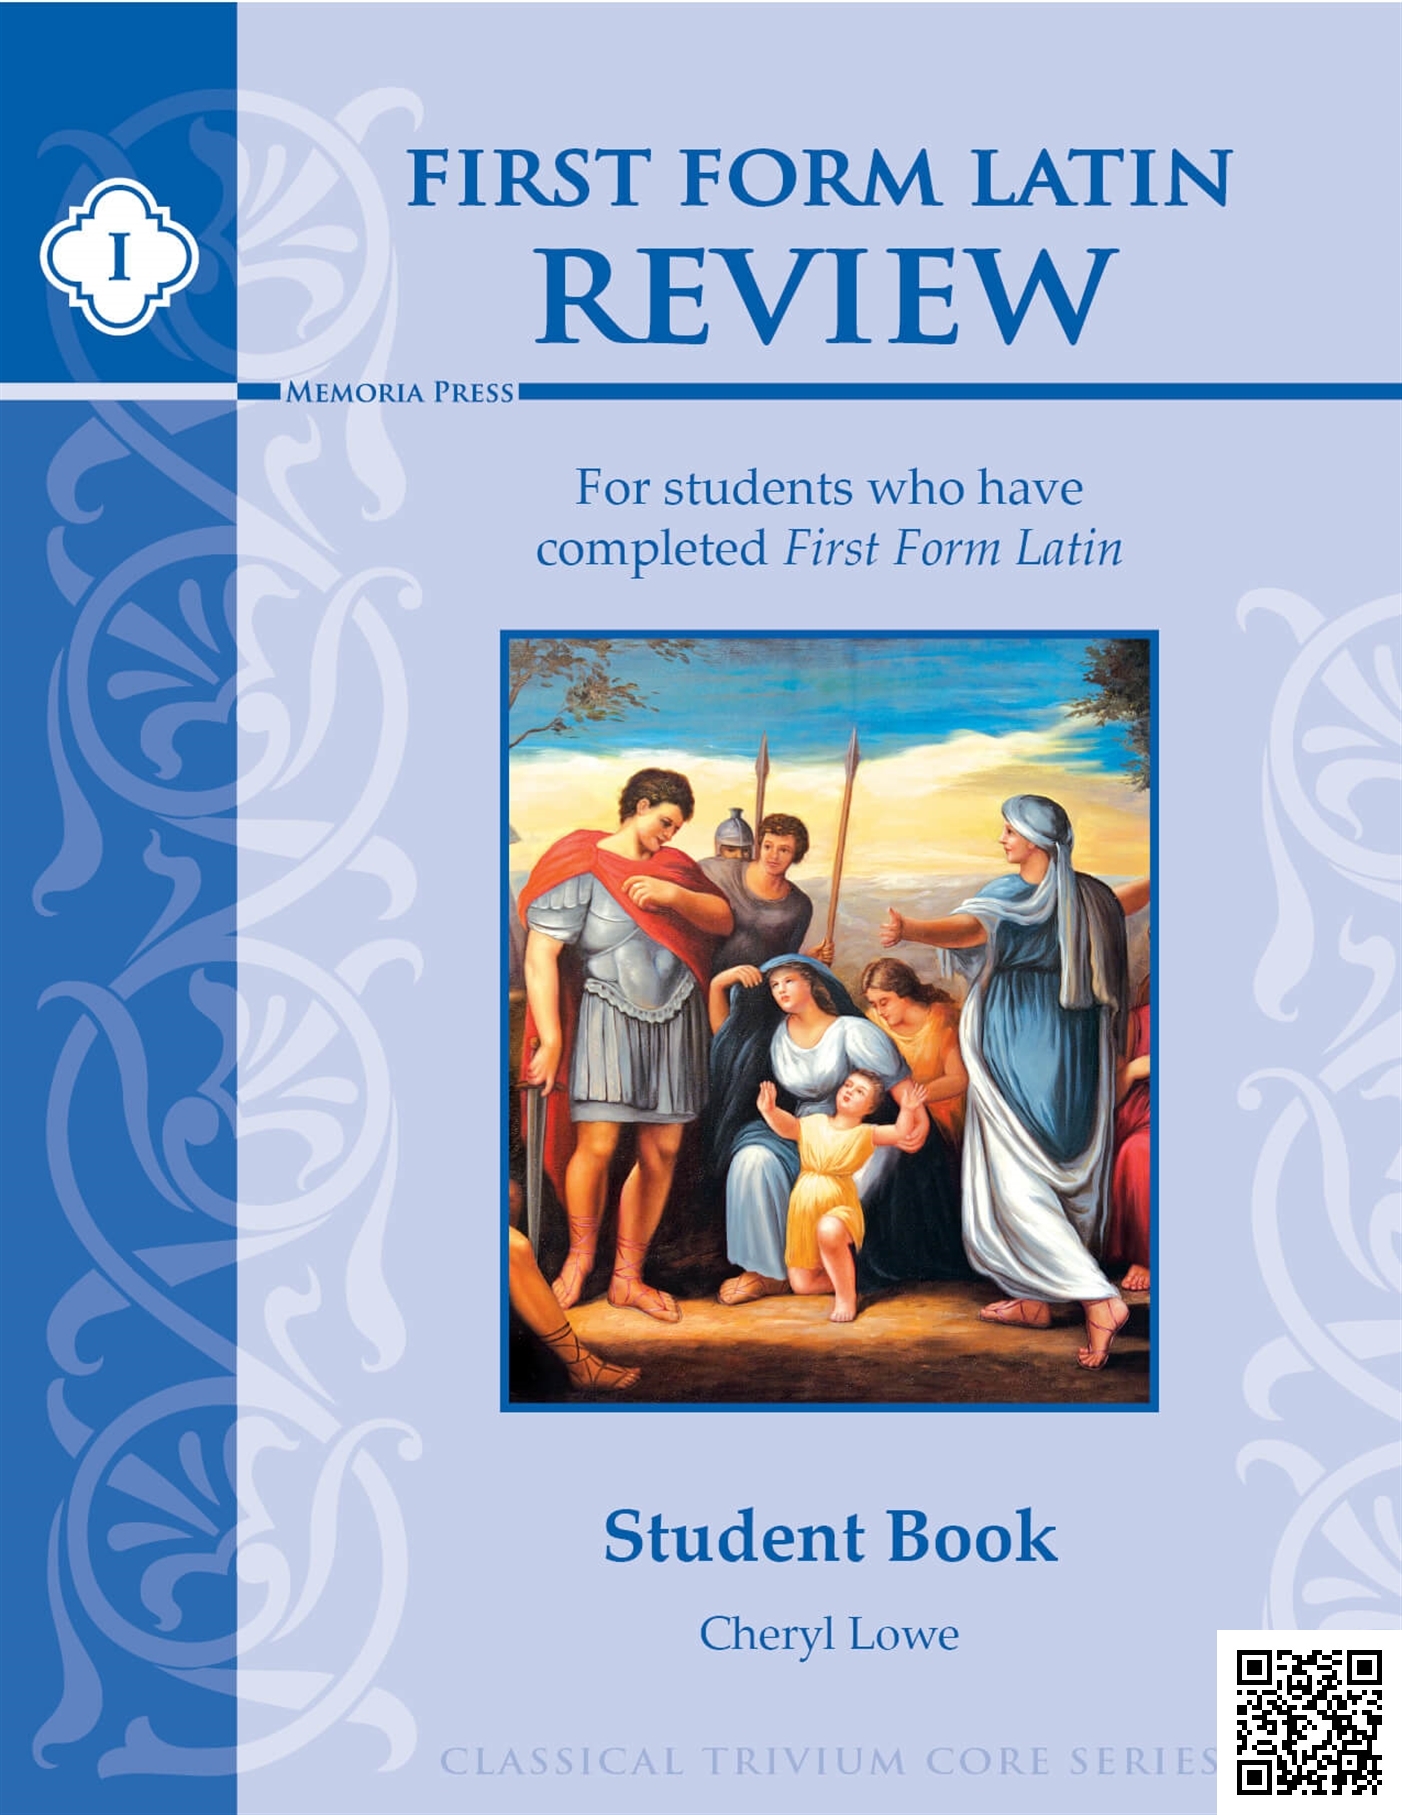 Student Book Review Sheet by Nicole Scalzo | Teachers Pay ...